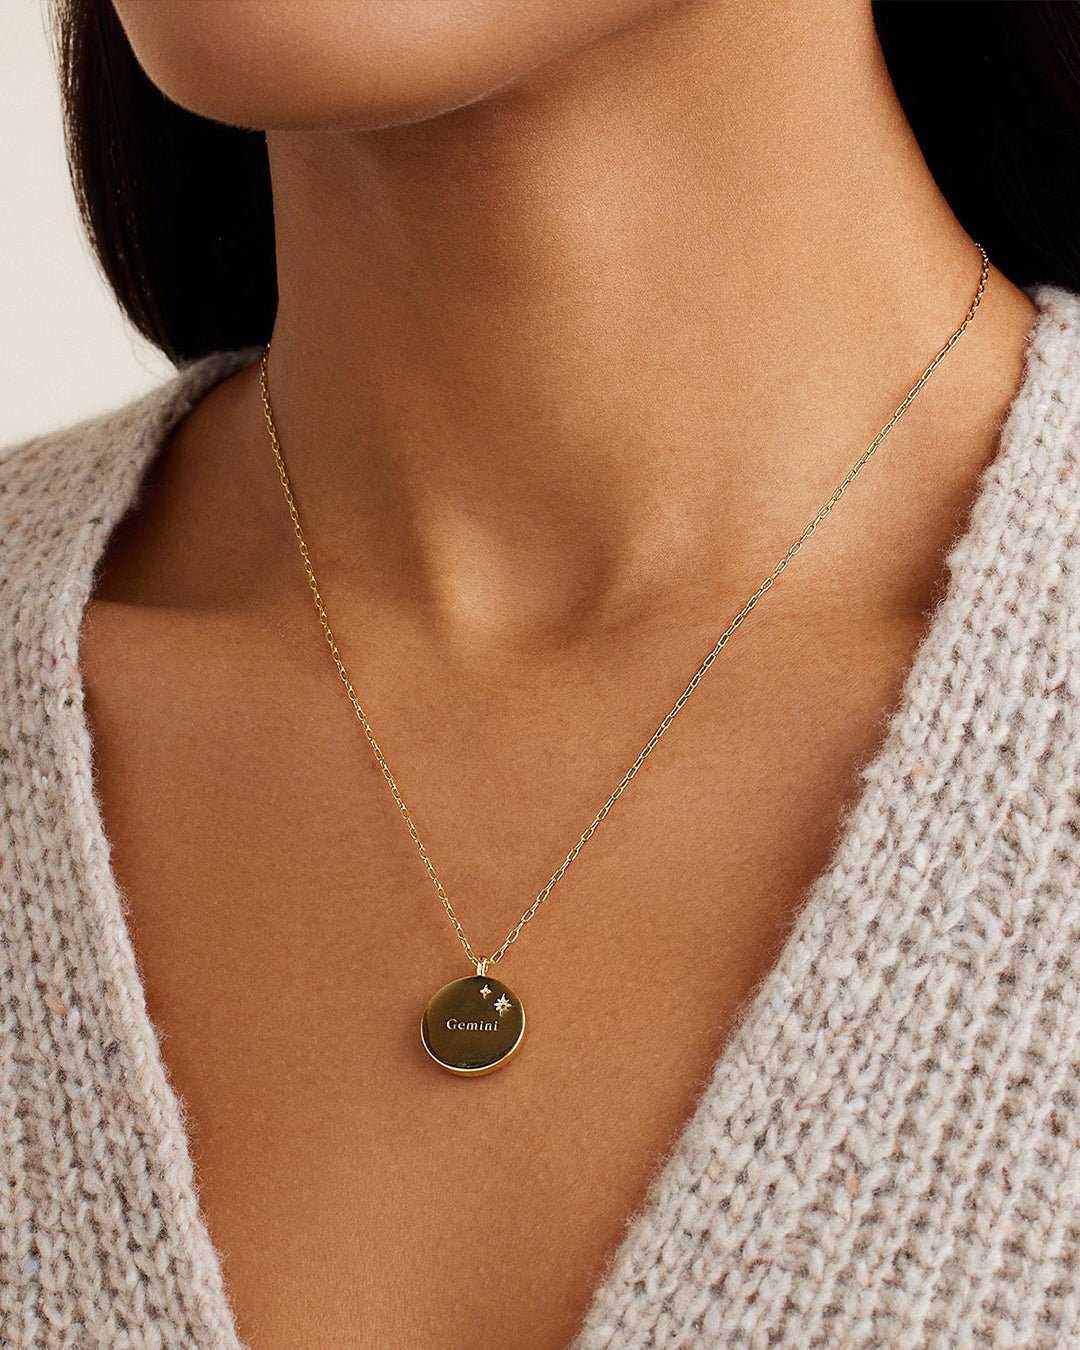 Zodiac Necklace - Gemini,  Astrology Coin Necklace,  Gemini Necklace   || option::Gold Plated, Gemini